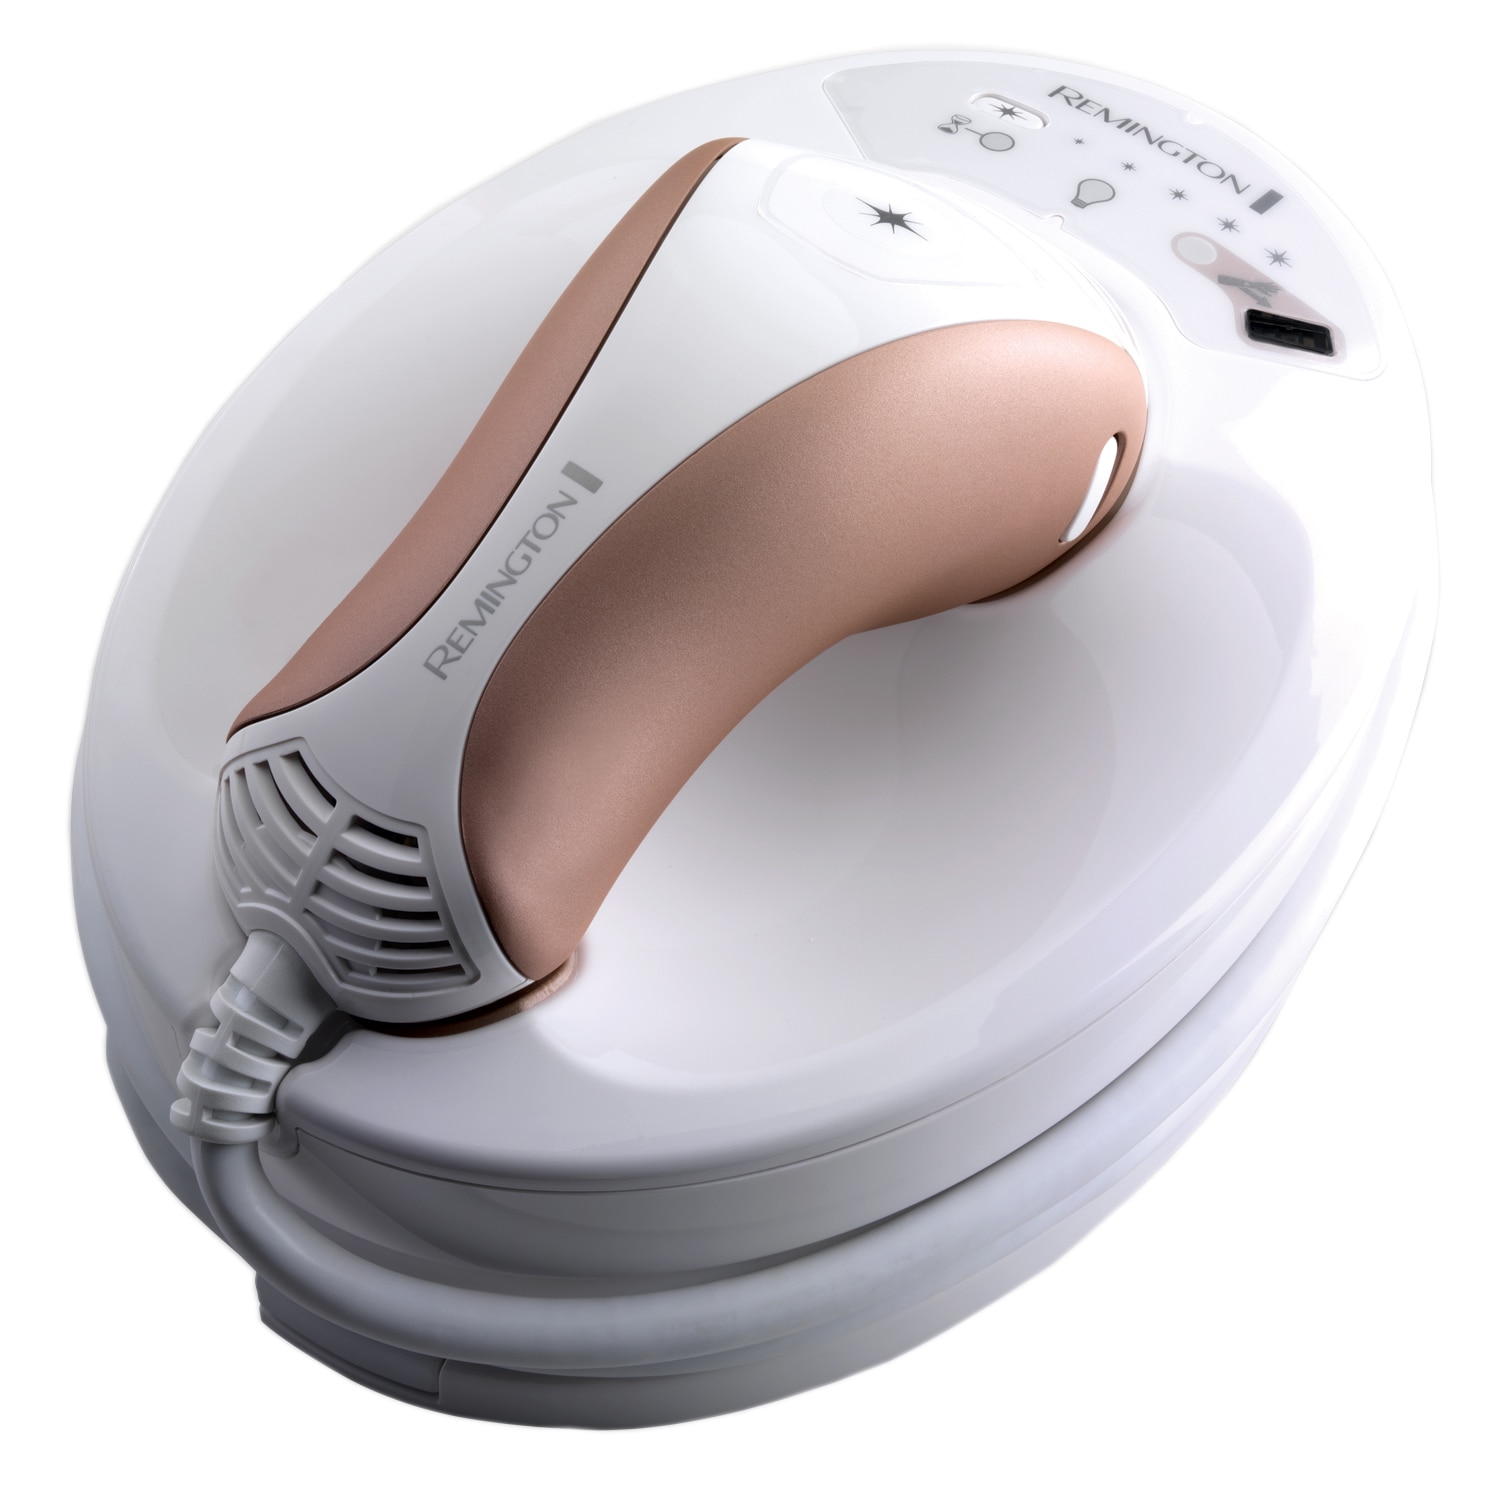 A central tool that plays an important role relief small Epilator cu lumina intens pulsata Remington IPL6000 - eMAG.ro